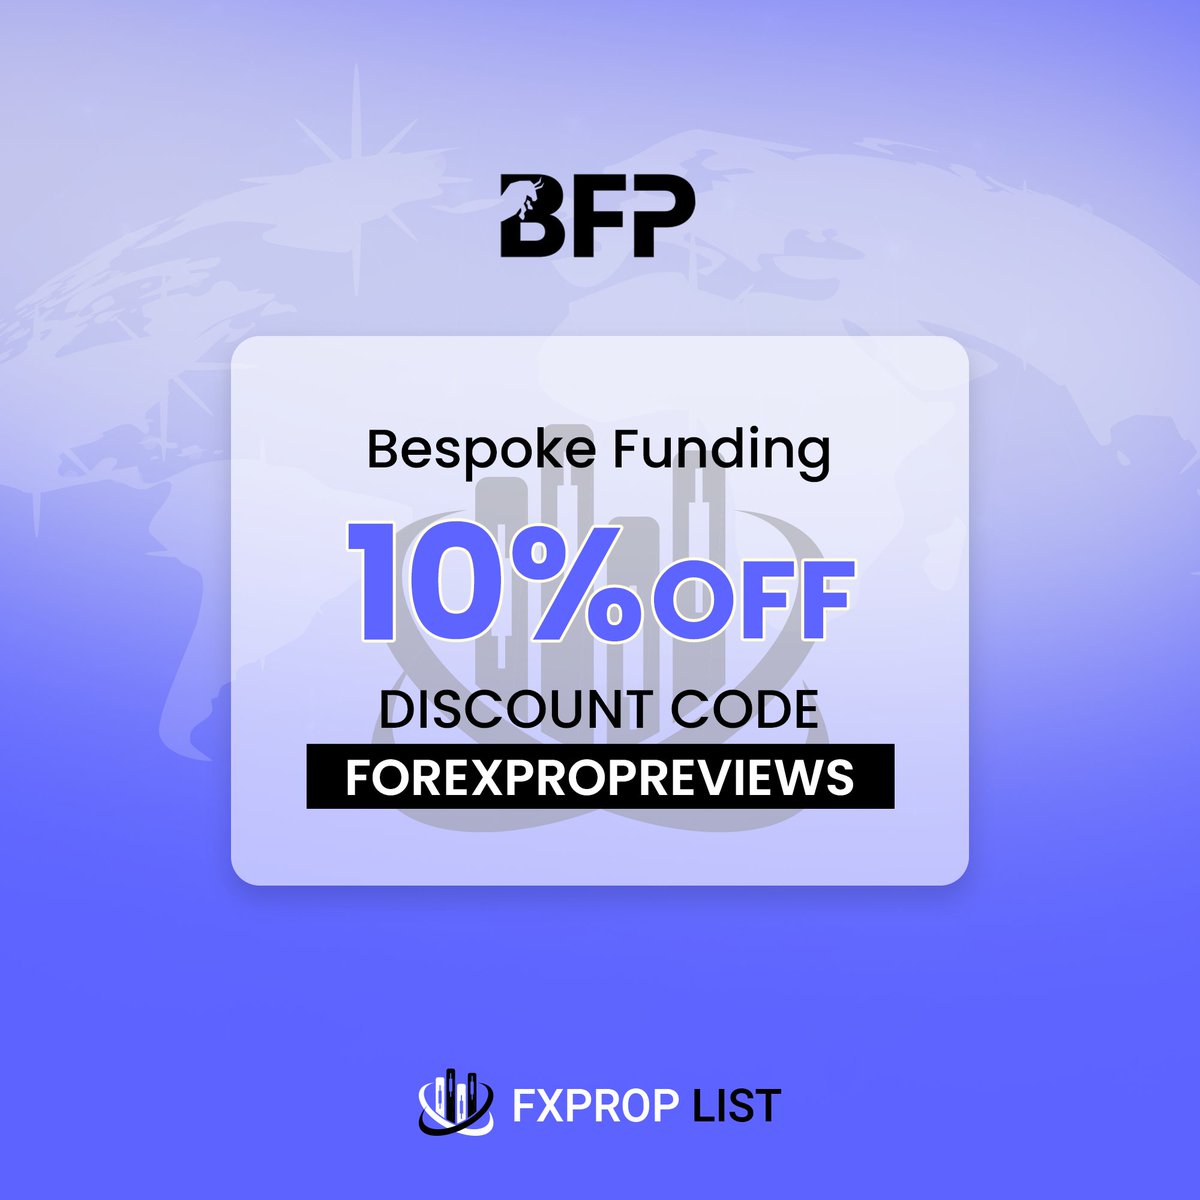 📢 Attention, Traders! Your search for fantastic discount trading opportunities ends here! 🤩 Simply use code 'FOREXPROPREVIEWS' and start saving today. 💰
#BeSpokeFunding #PropFirm #Forex #Discount